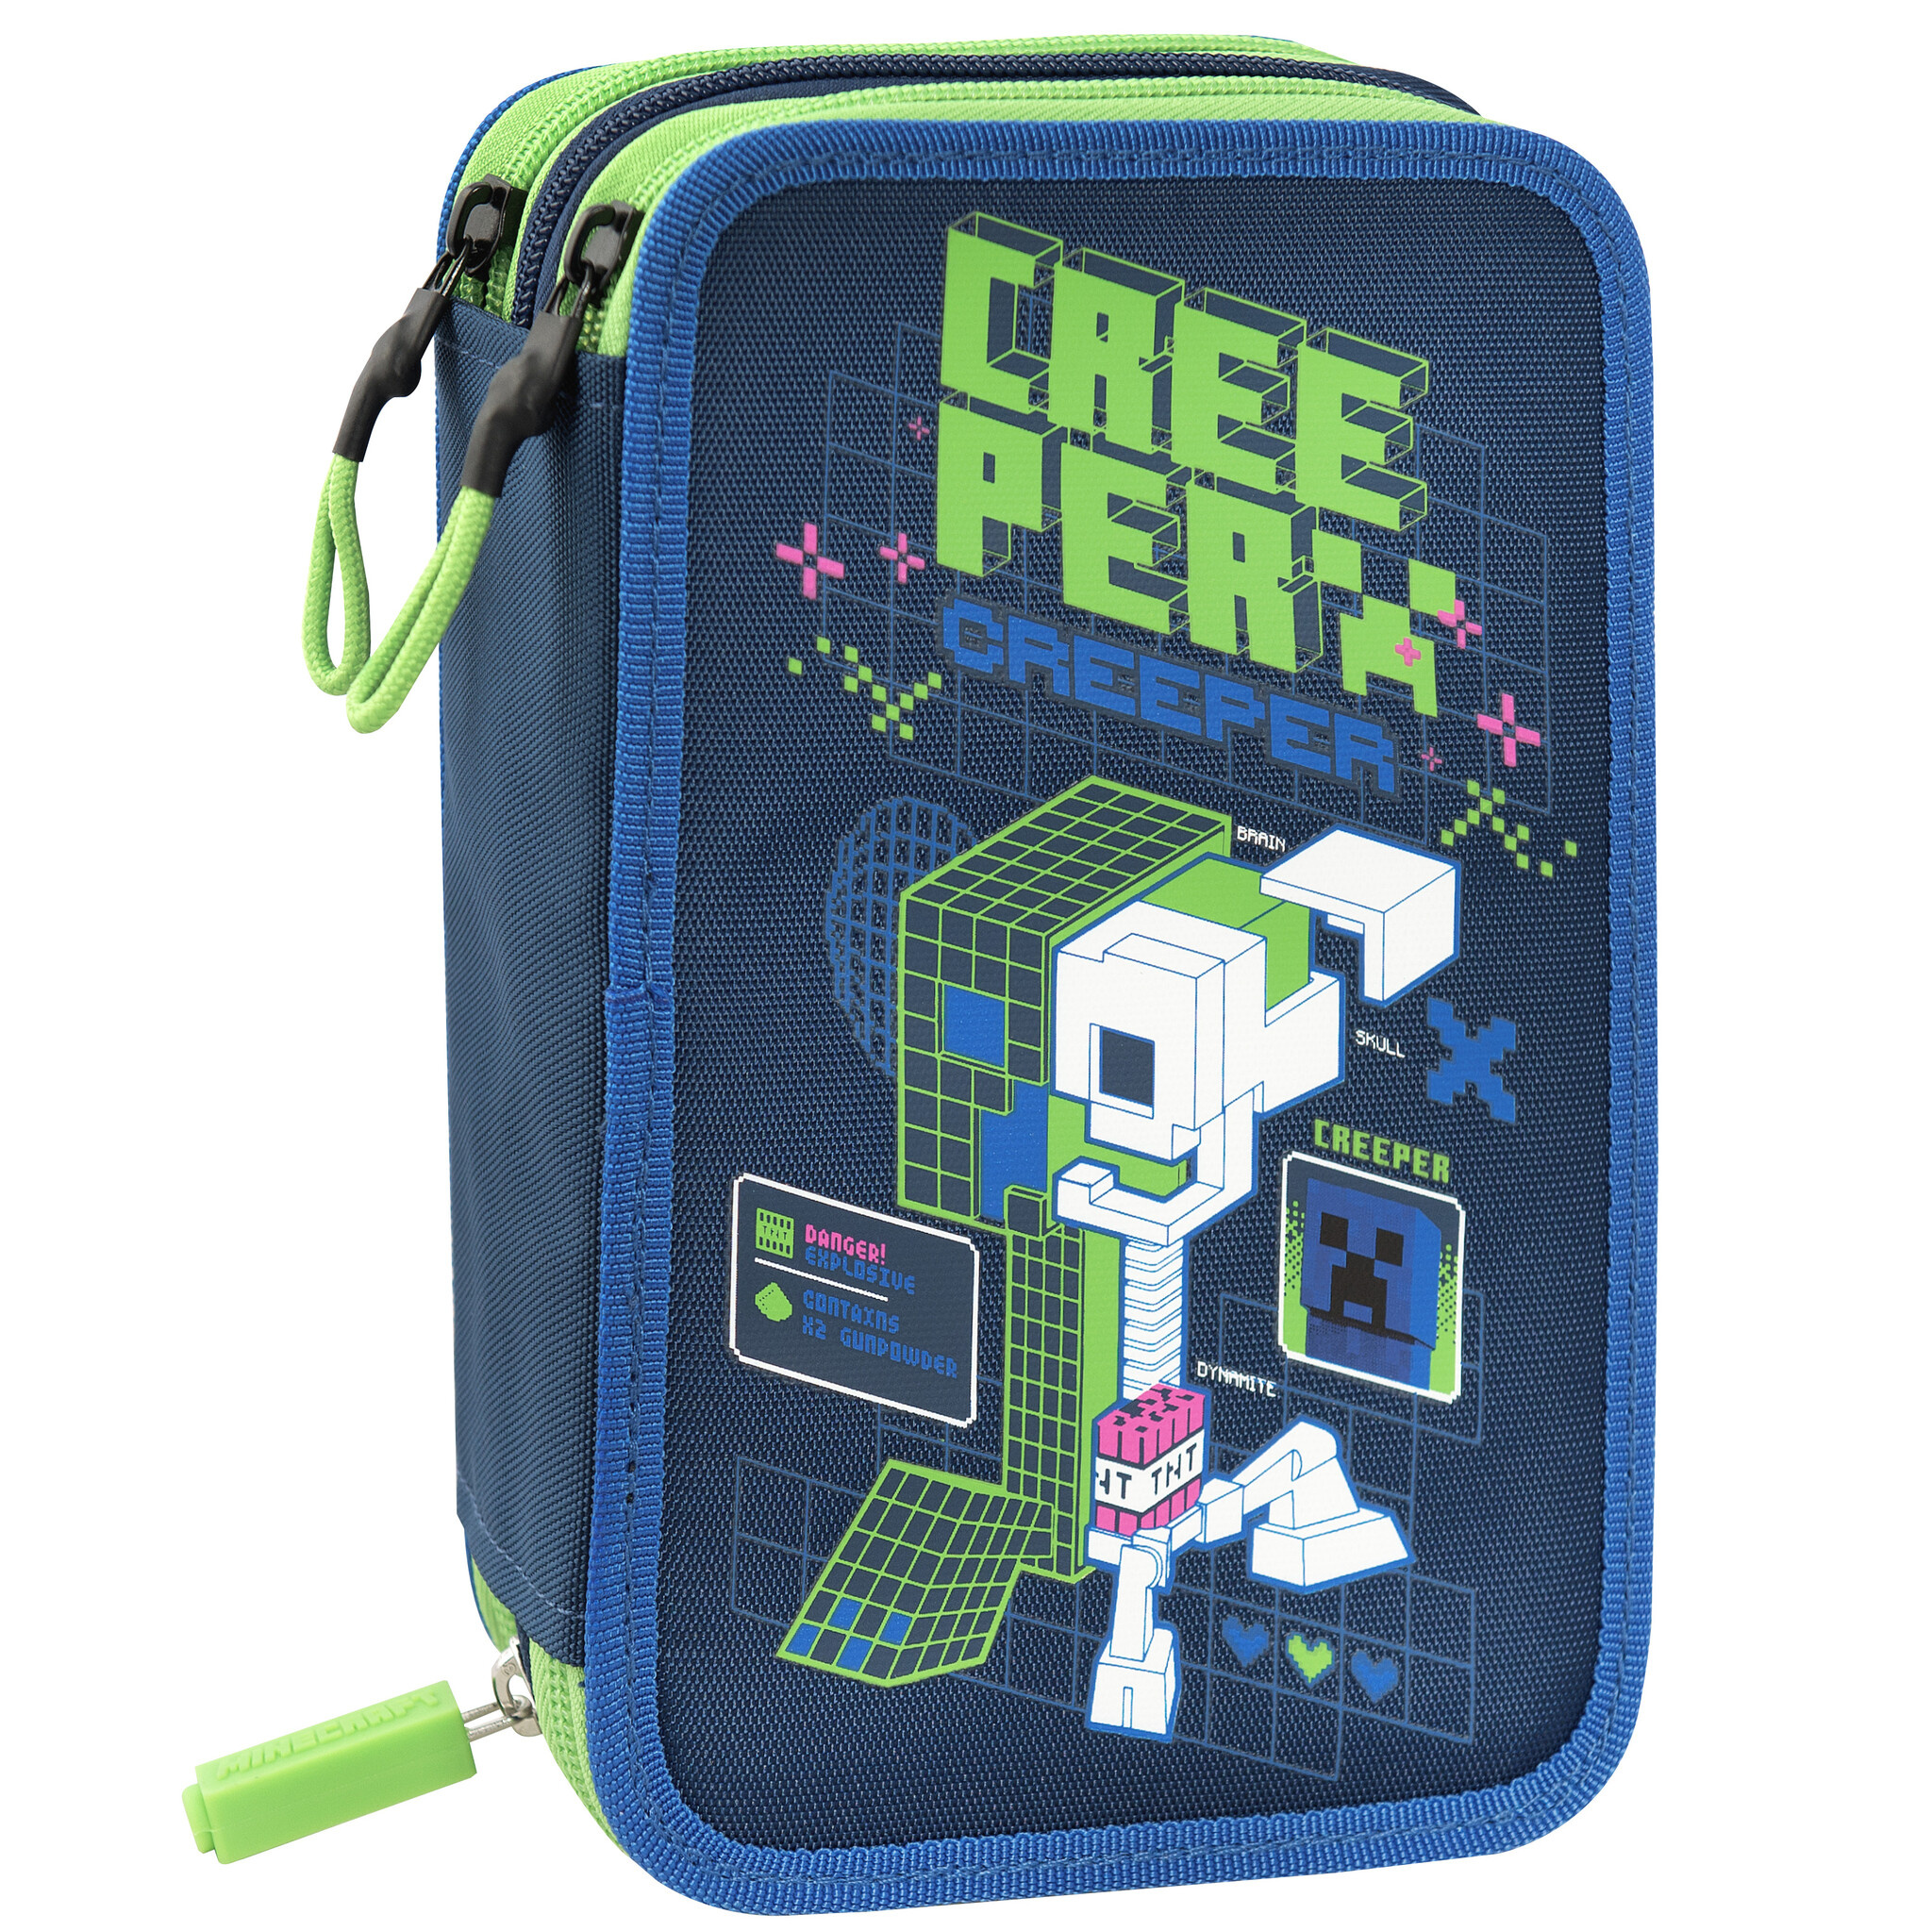 Minecraft Filled Pencil Case Creeper 3 zippers - 20 x 13 x 7 cm - Polyester